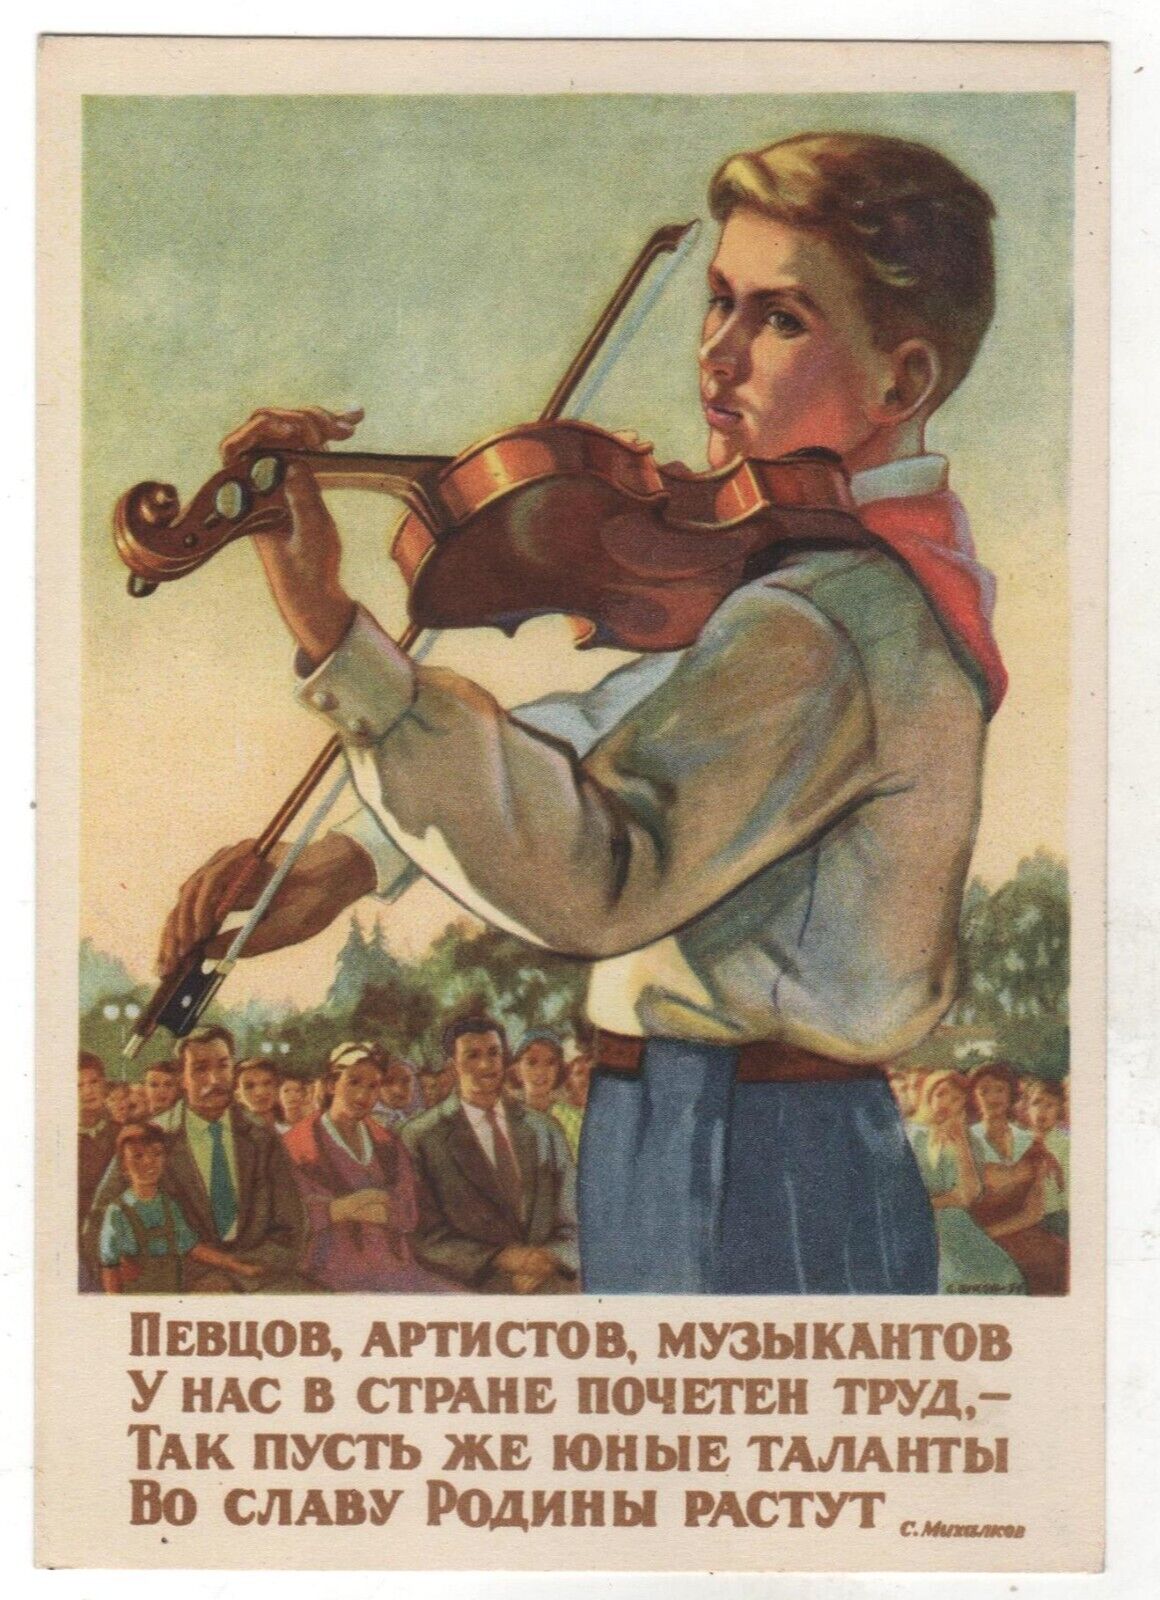 1956 Performance by a musician Boy plays the violin Concert RUSSIAN POSTCARD Old